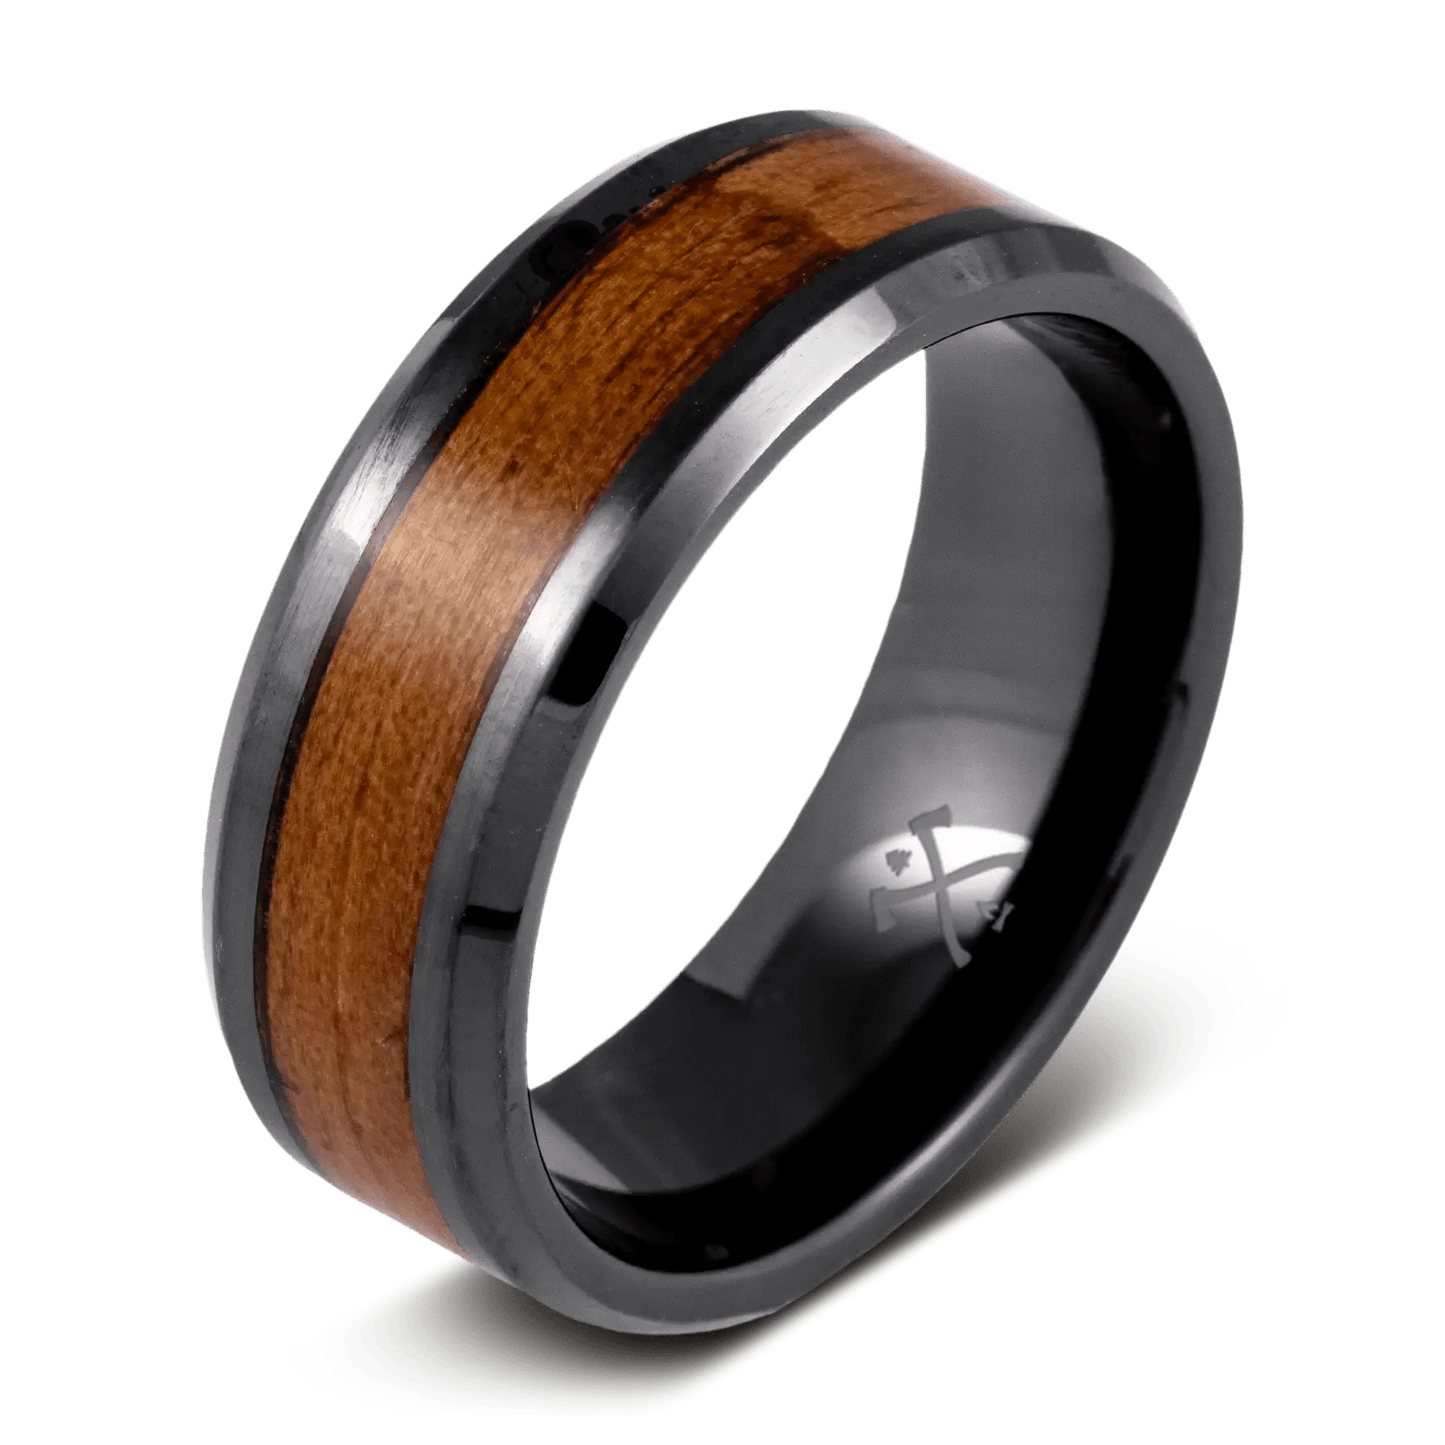 The Garand. Black ring for men made with black ceramic and WWII M1 Garand rifle stock inlay